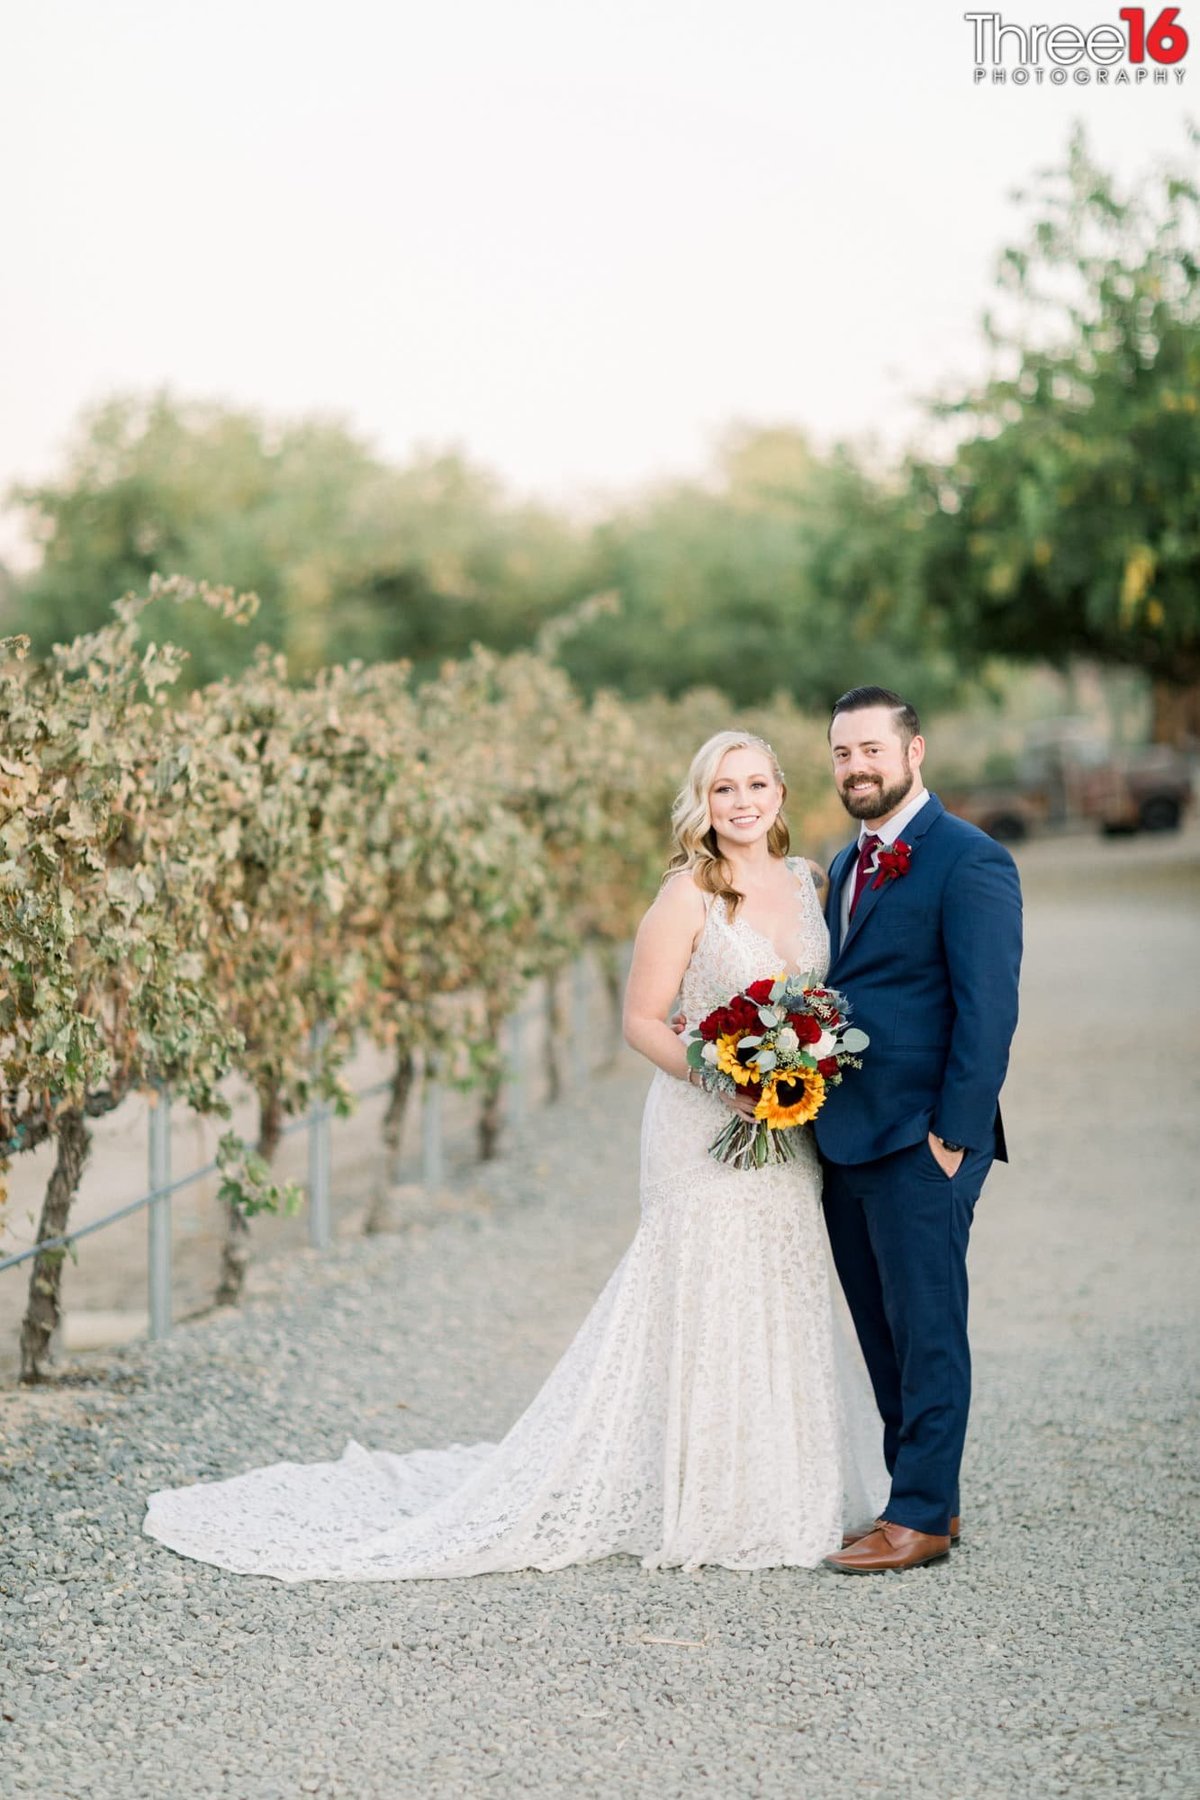 Bride and Groom pose together amongst the winery's bushes at the Peltzer Winery wedding venue